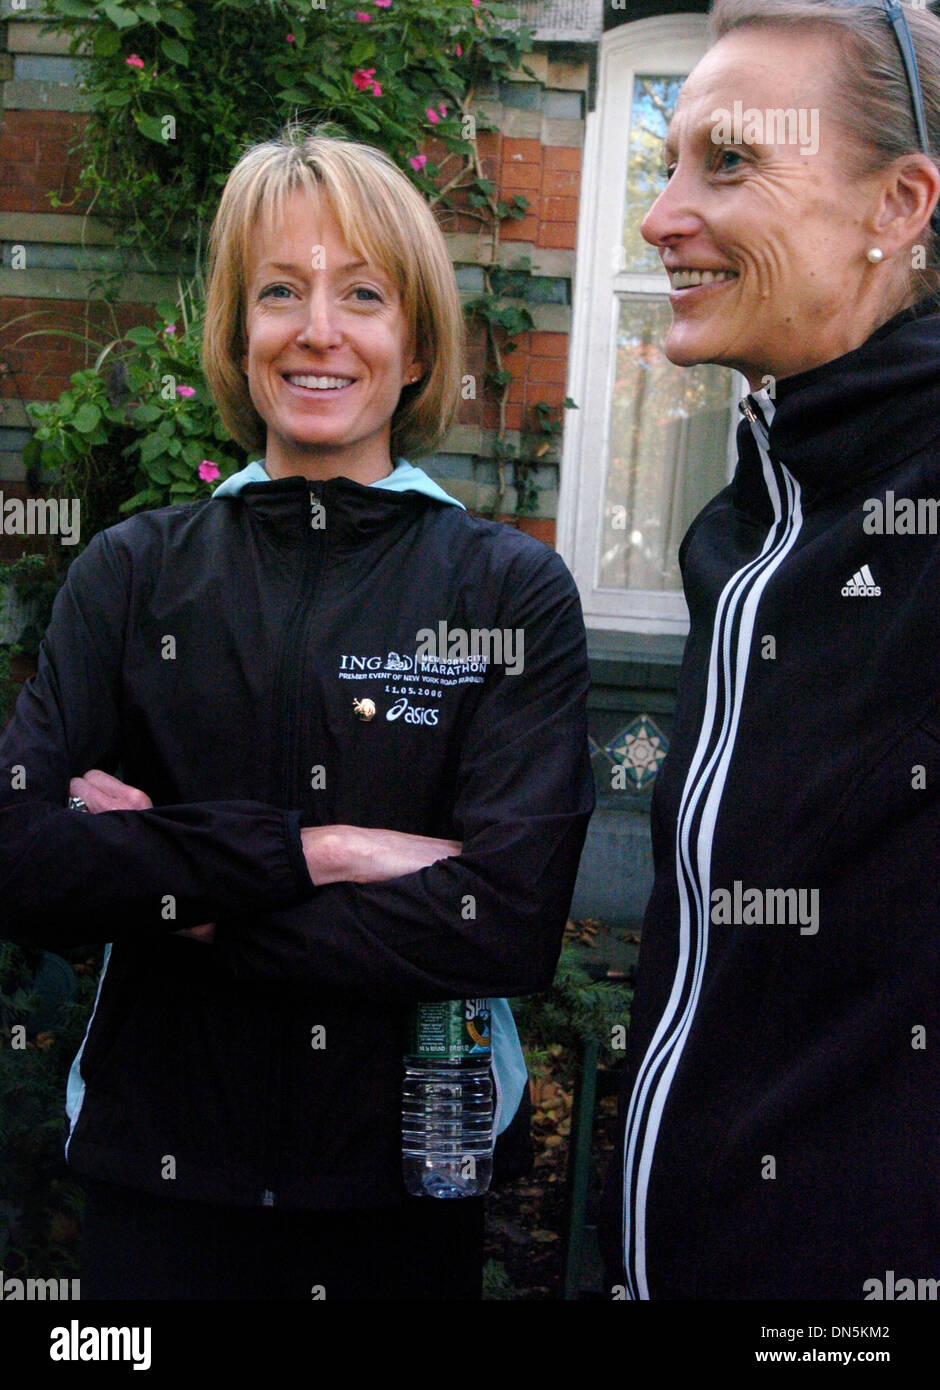 Oct 31, 2006; MANHATTAN, NY, USA; DEENA KASTOR (L) and 9-time NYC Marathon winner GRETE WAITZ (R), of Norway walk in Central Park. 2006 New York City Marathon press conference with Deena Kastor at Tavern on the Green in Central Park near the finish line. Kastor, 33, of Mammoth Lakes, CA is the 2004 Olympic Bronze medalist in the marathon and is favored to be the first American woma Stock Photo